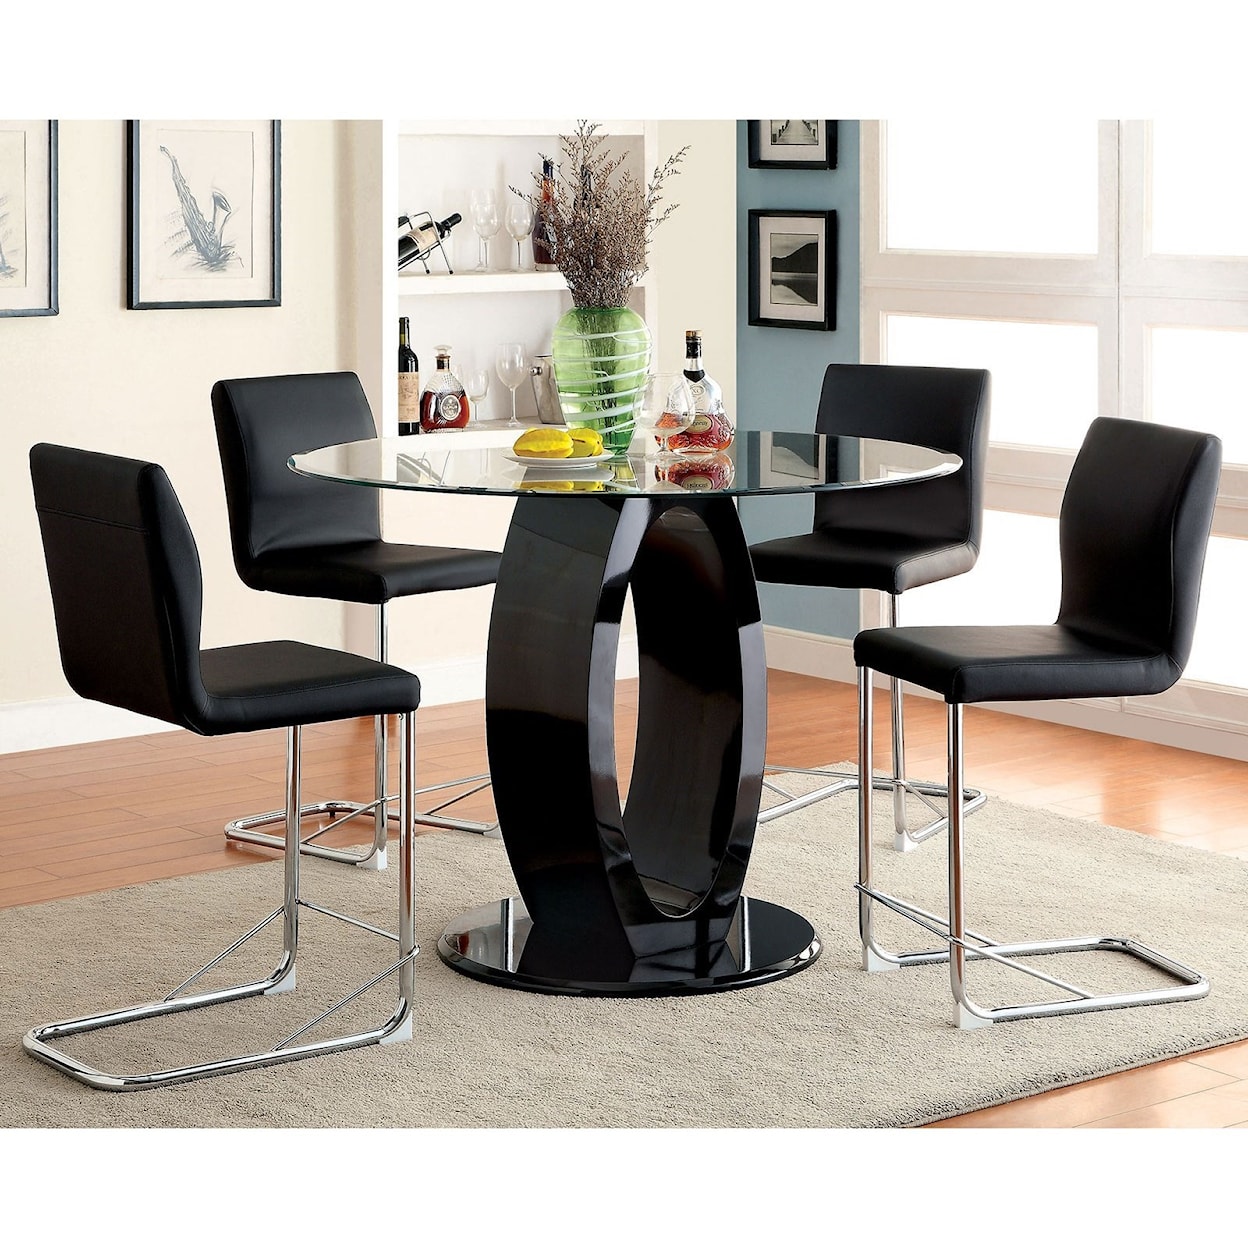 FUSA Lodia II Set of 2 Counter Height Chairs